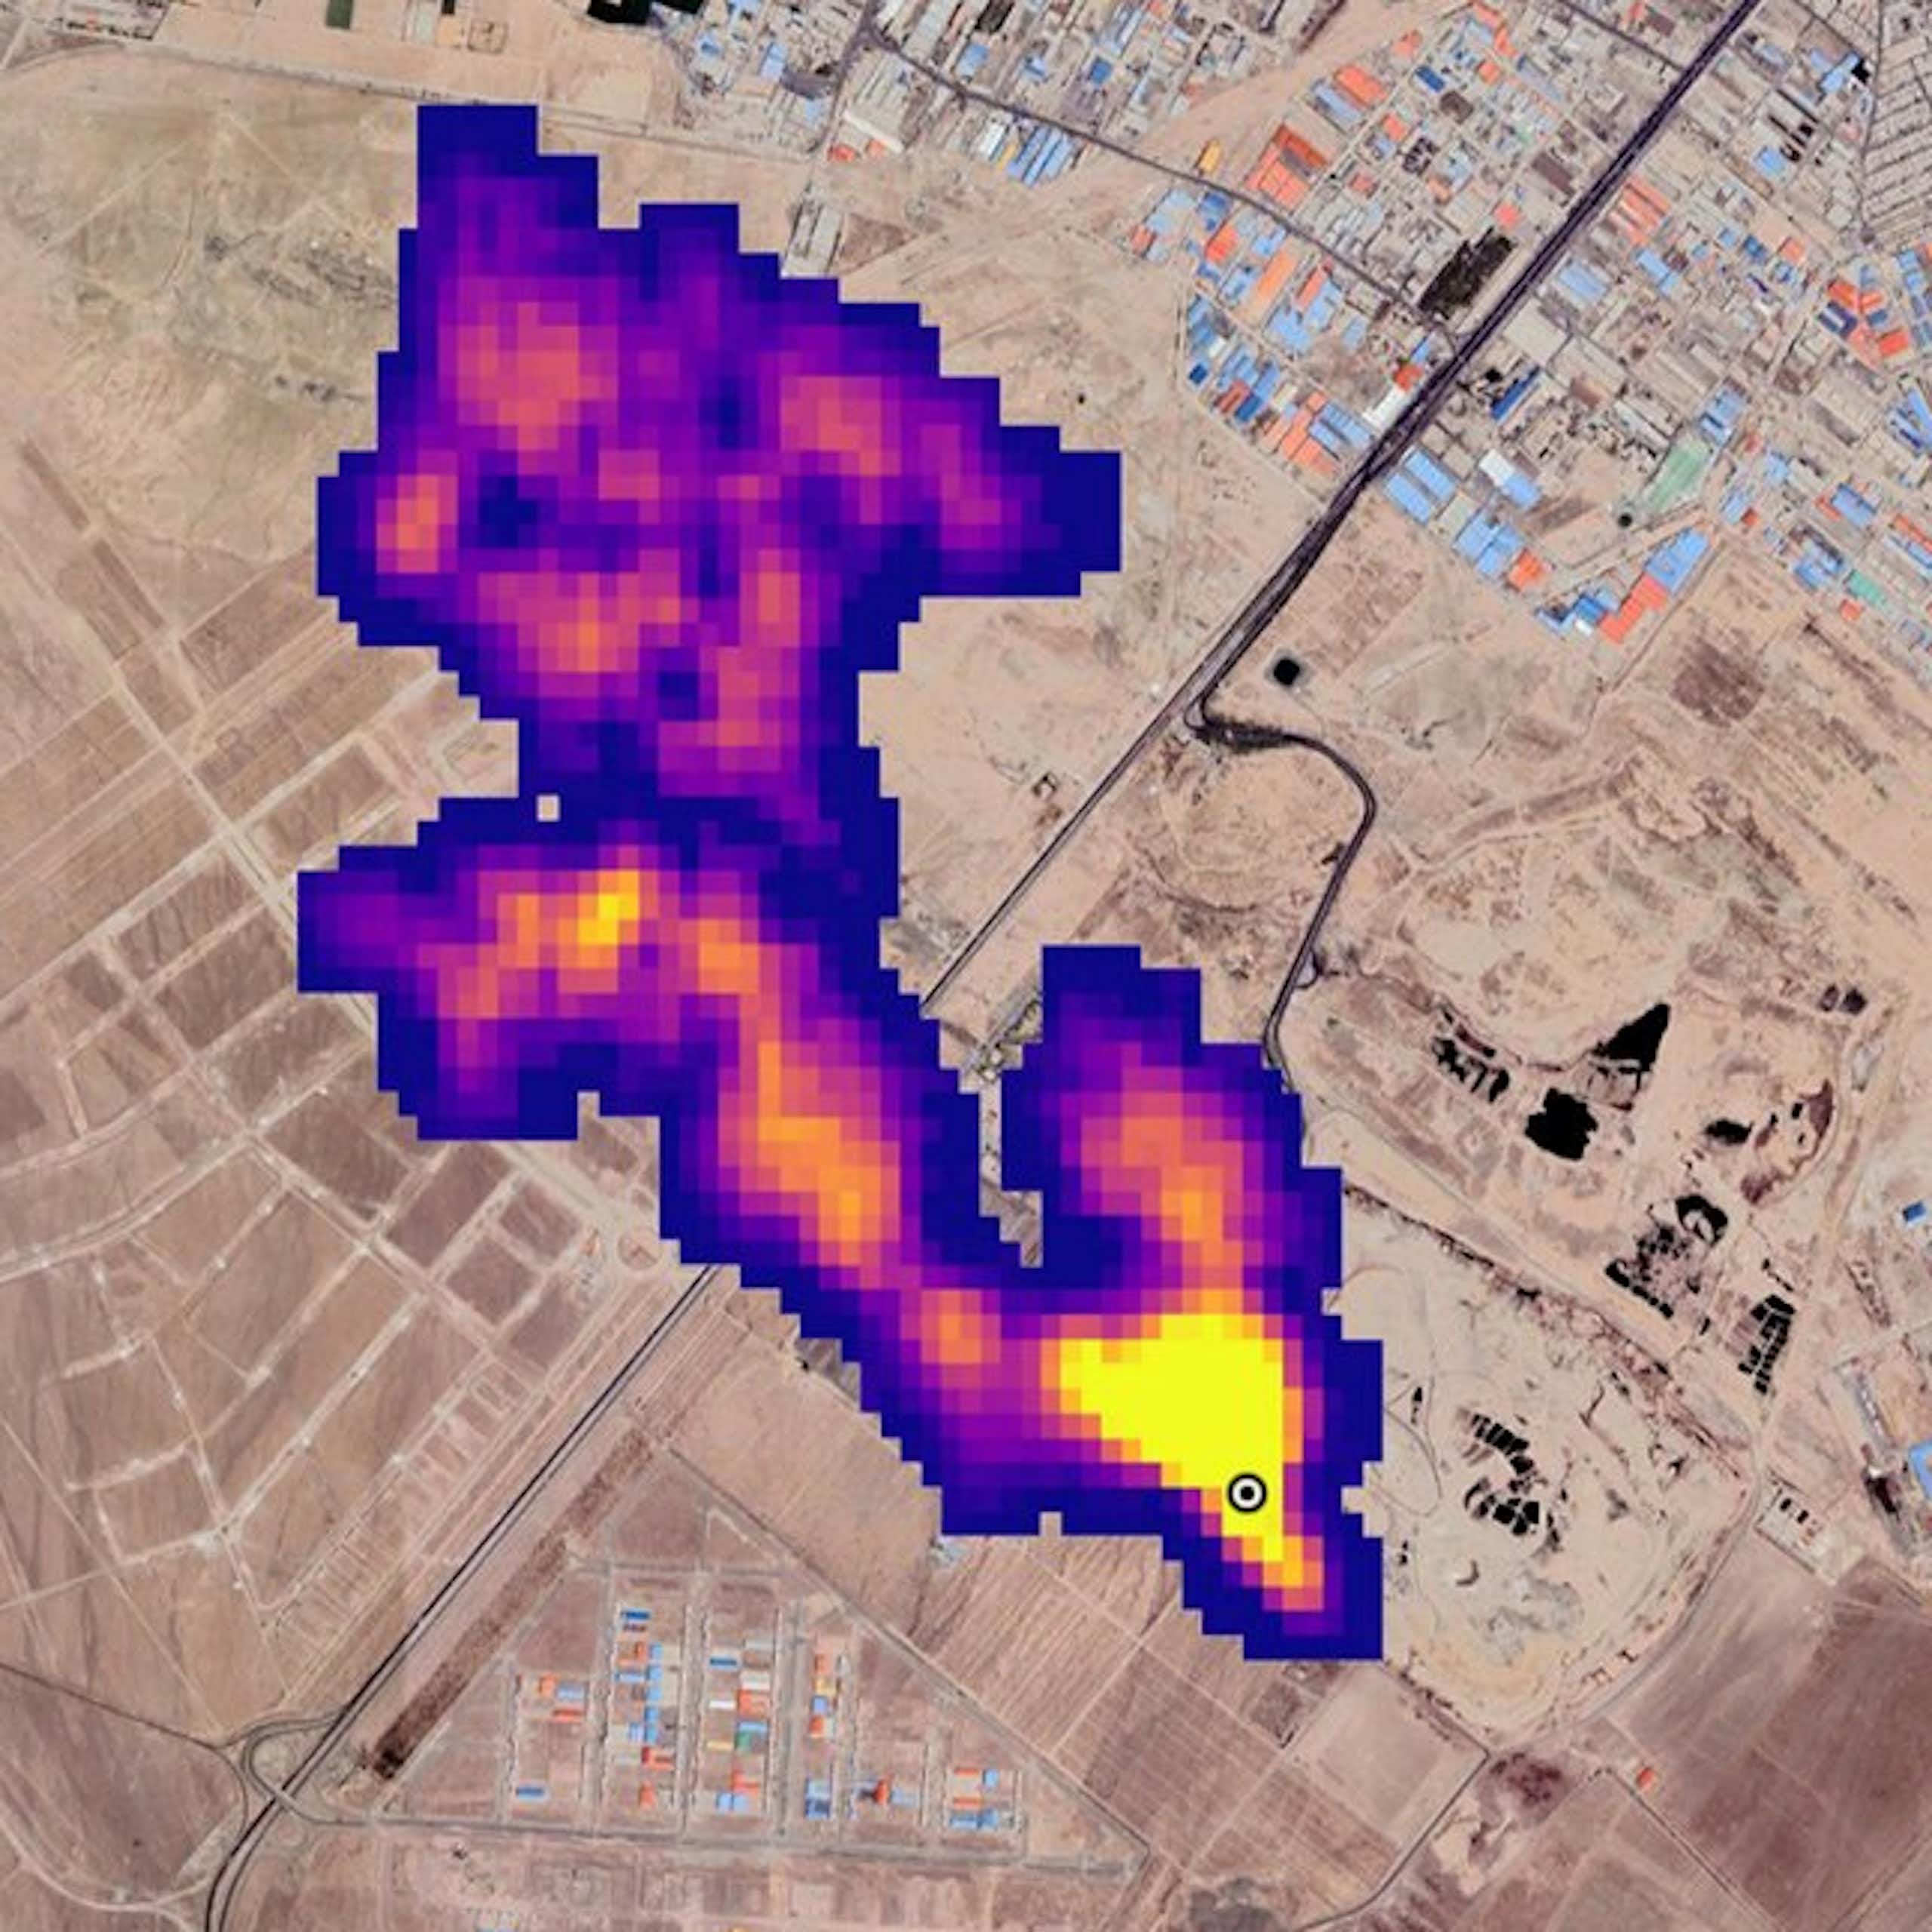 A colored image show methane leaking form a source with buildings nearby.